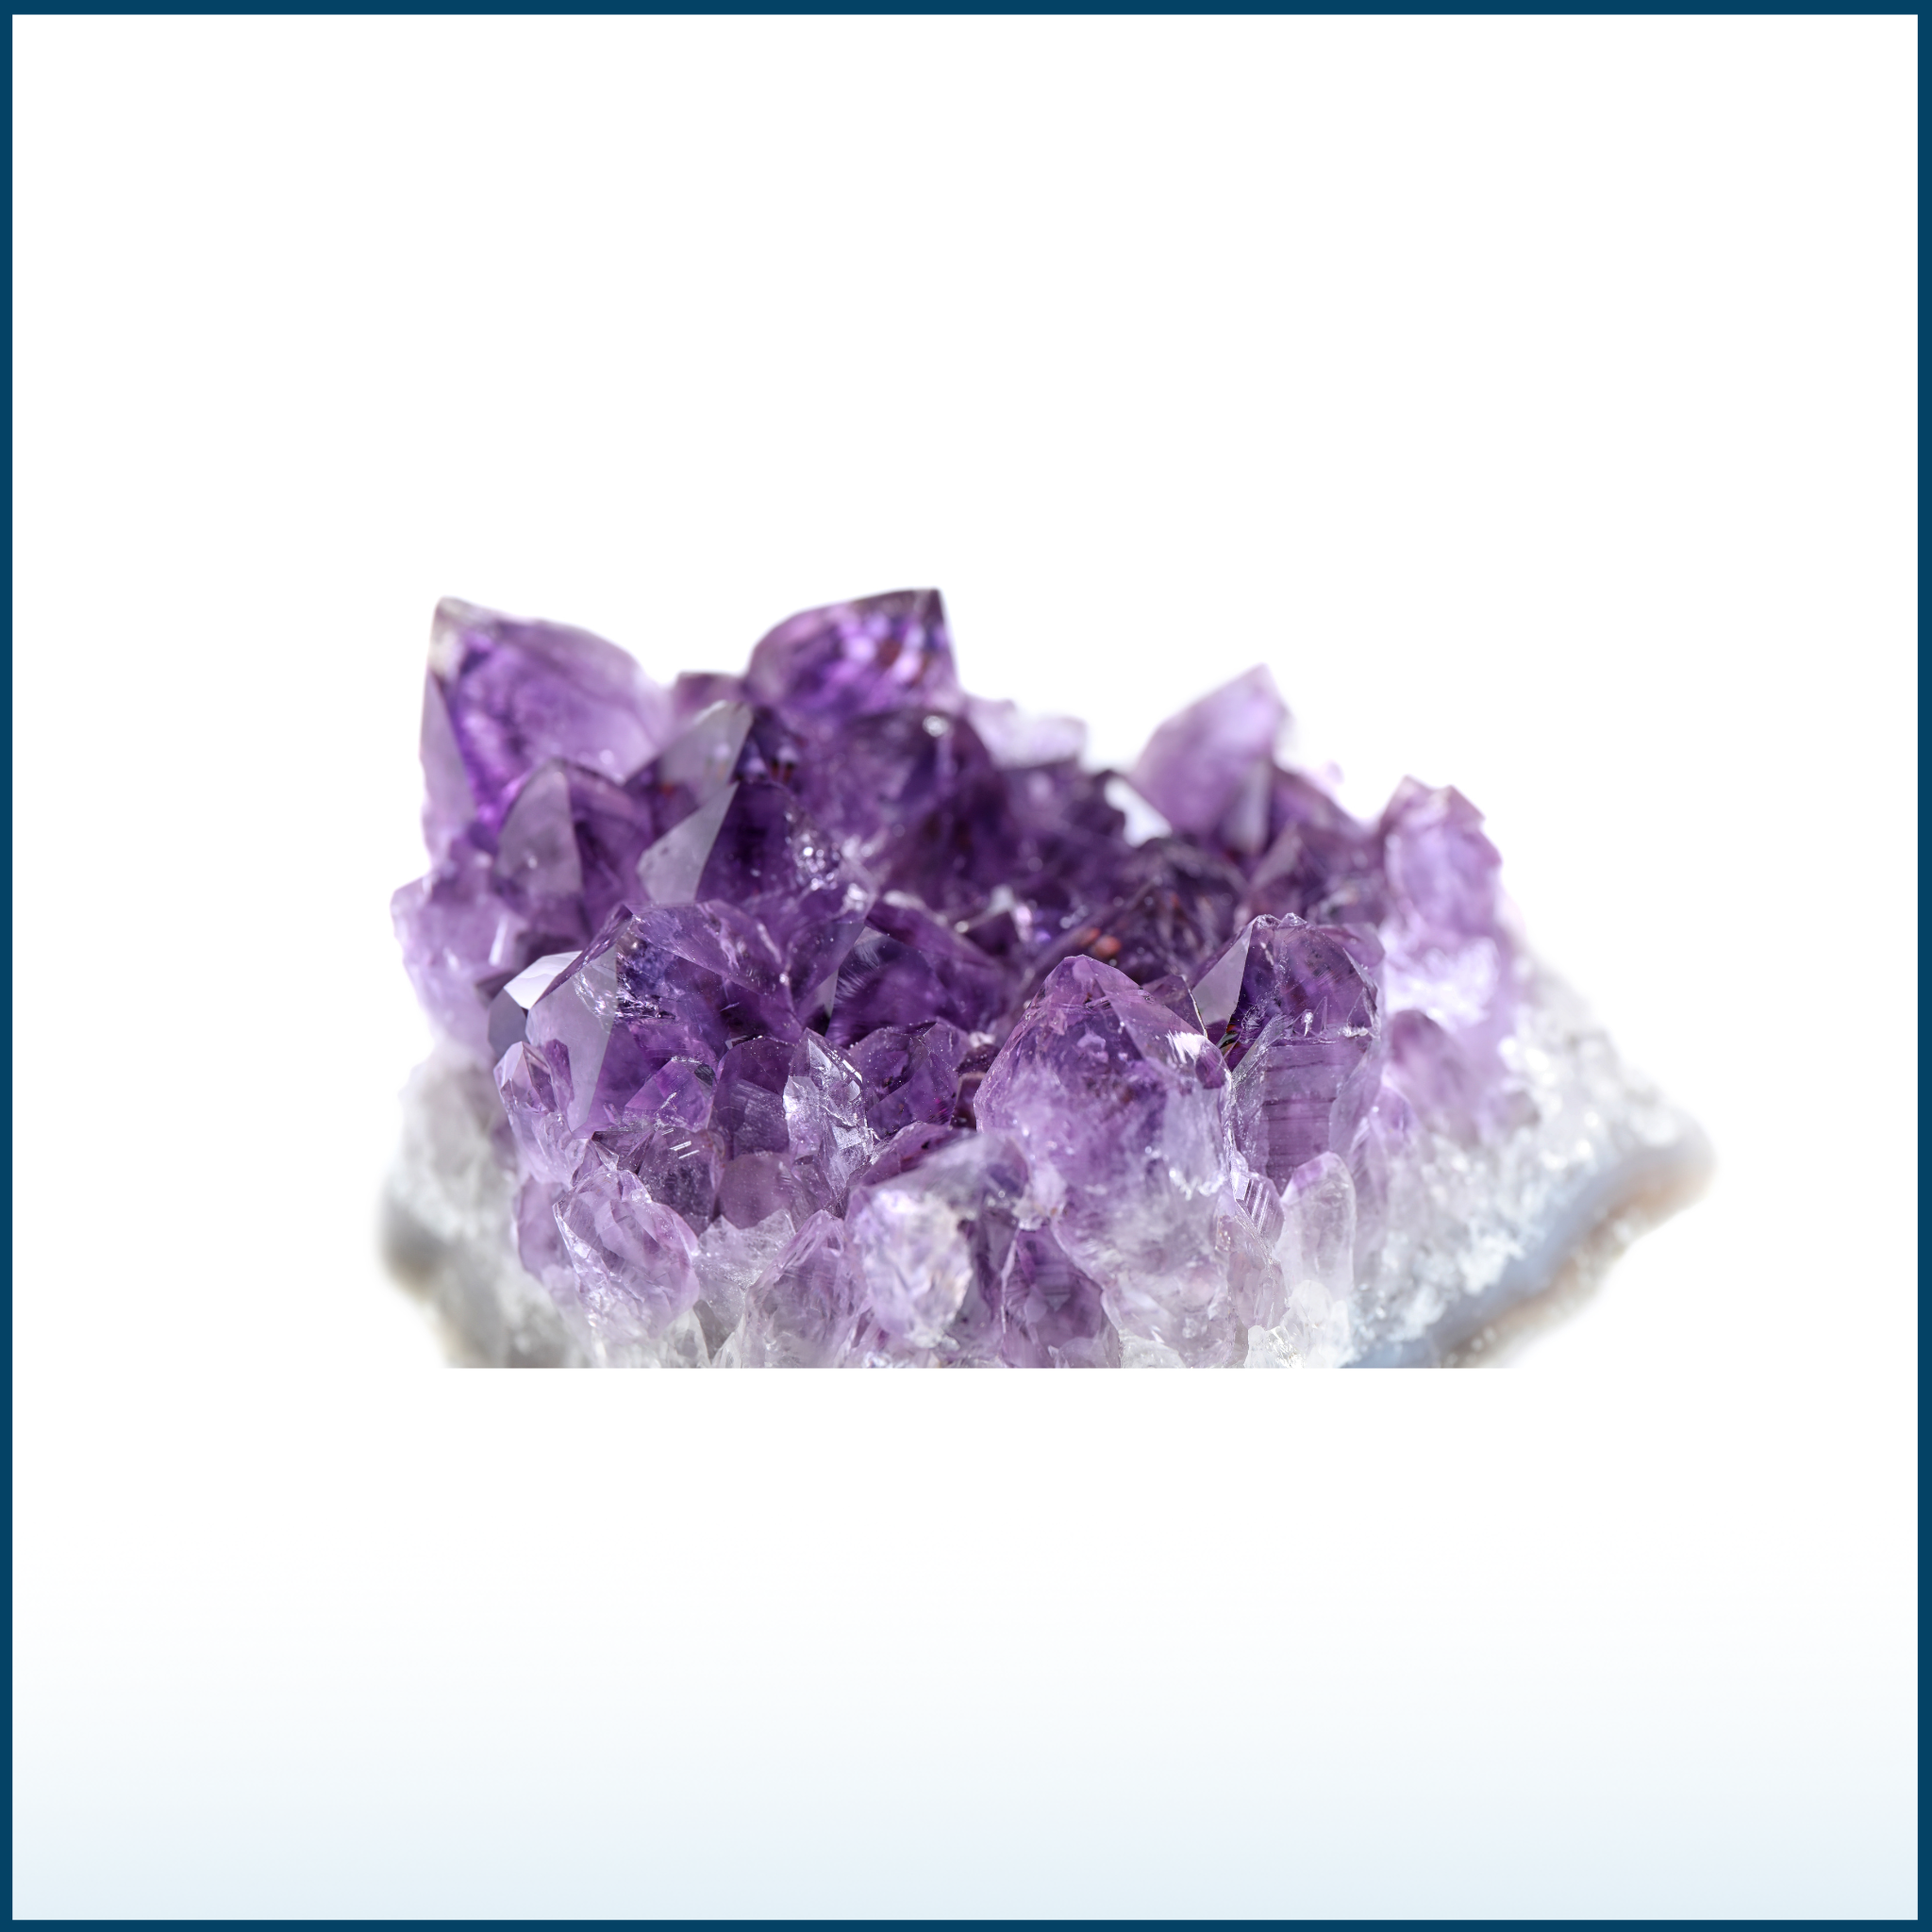 Enhance Your Space with Stunning Amethyst Clusters - Natural Healing Crystals for Positive Energy and Décor-15